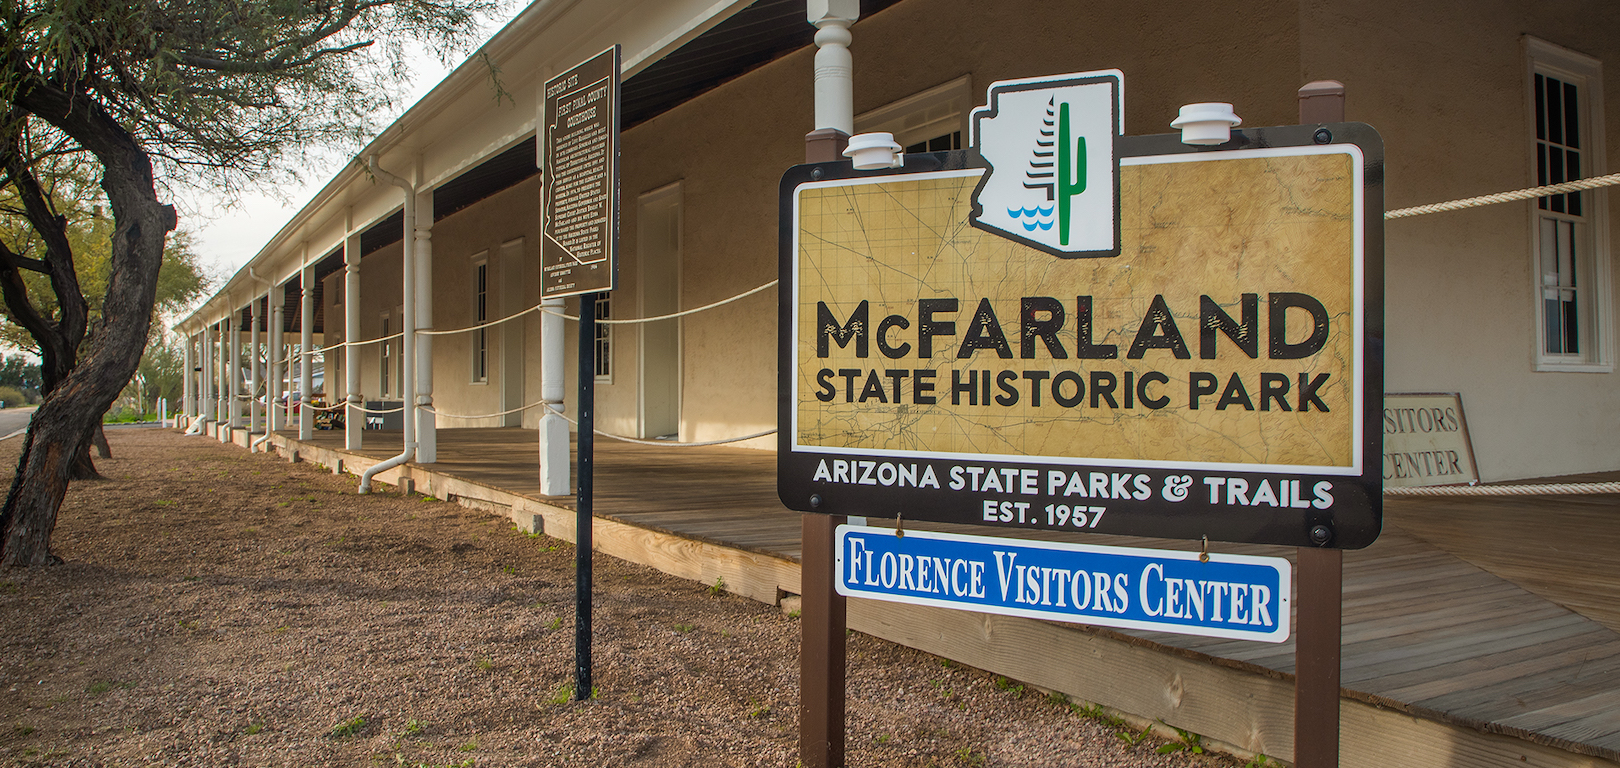 The main sign identifying McFarland State Historic Park and visitor center